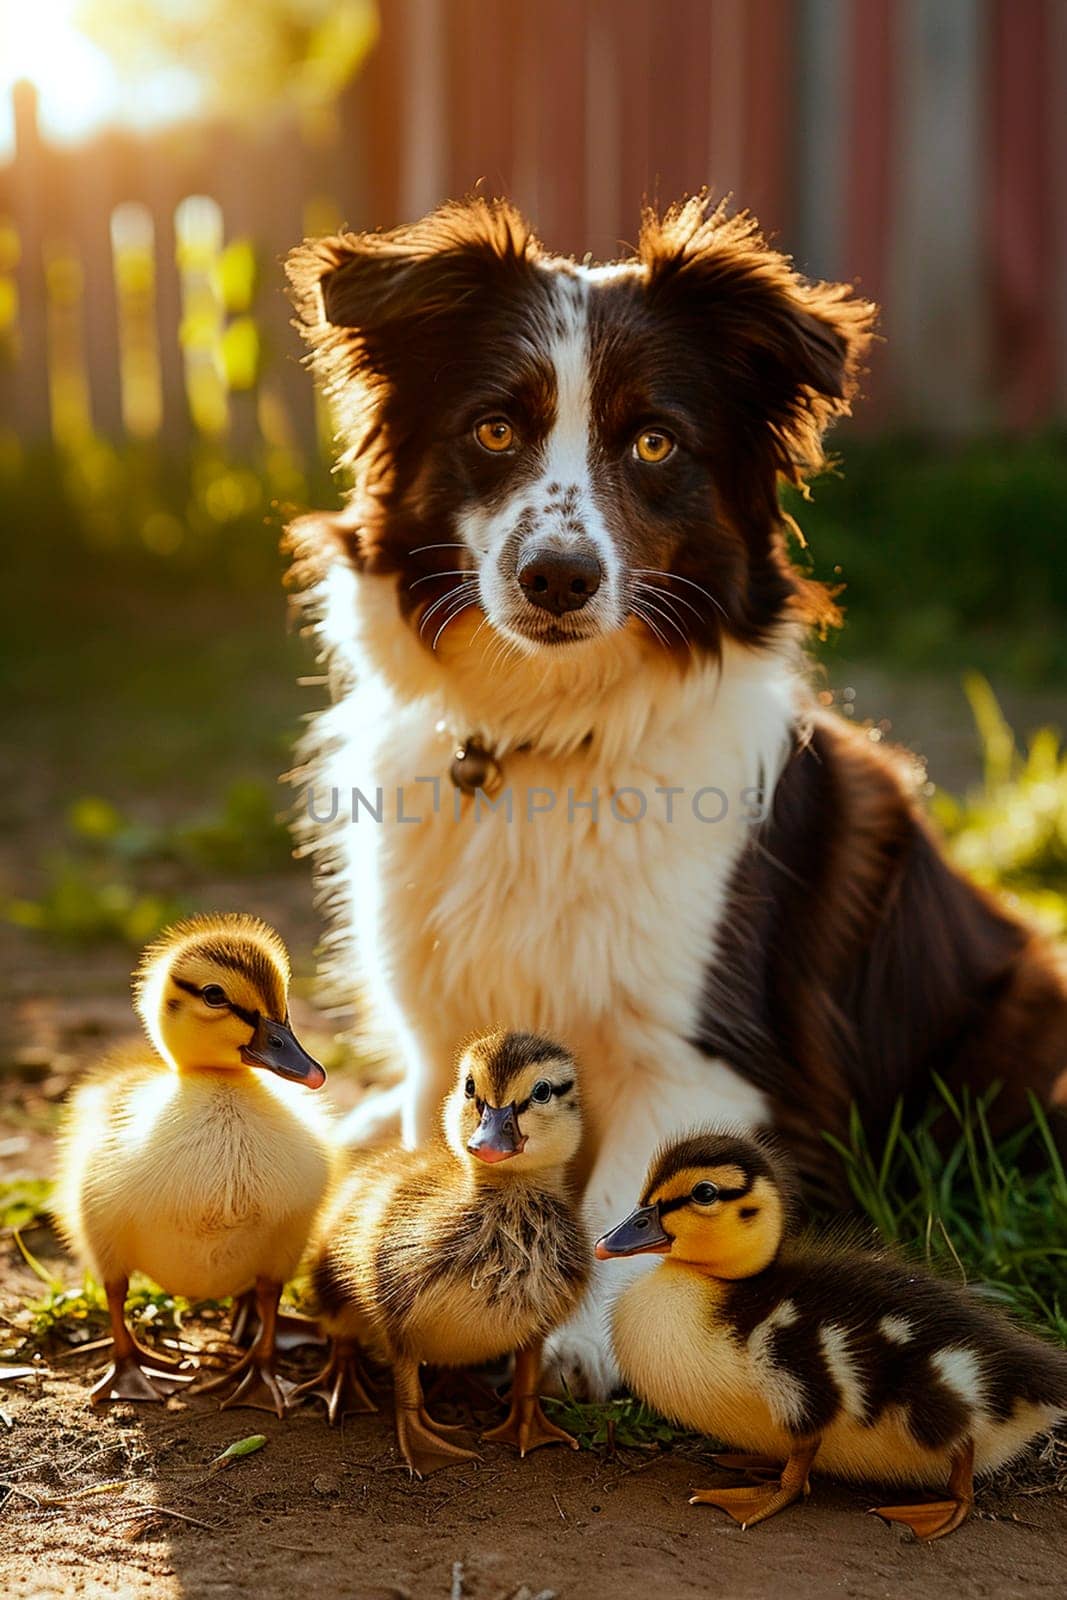 Dog with ducklings in the yard. Selective focus. animal.